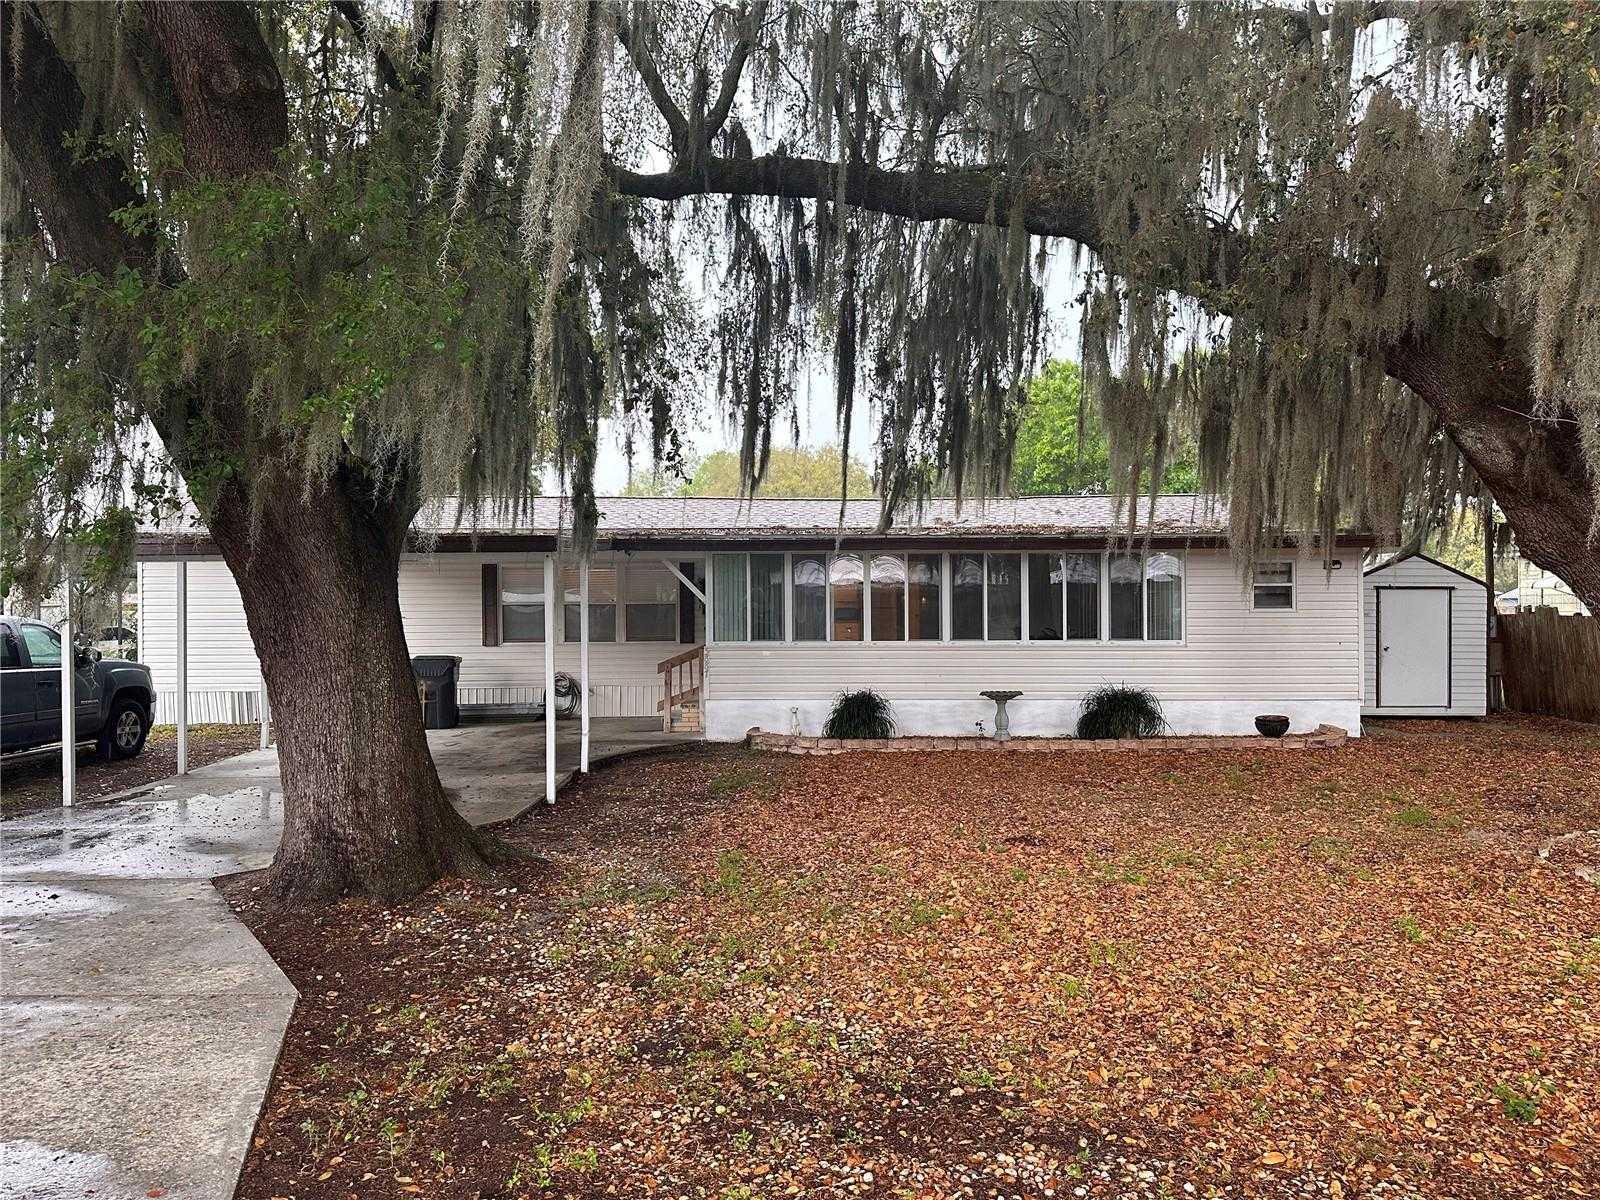 5887 FOX HAVEN, WINTER HAVEN, Manufactured Home - Post 1977,  for sale, Crosby and Associates Inc